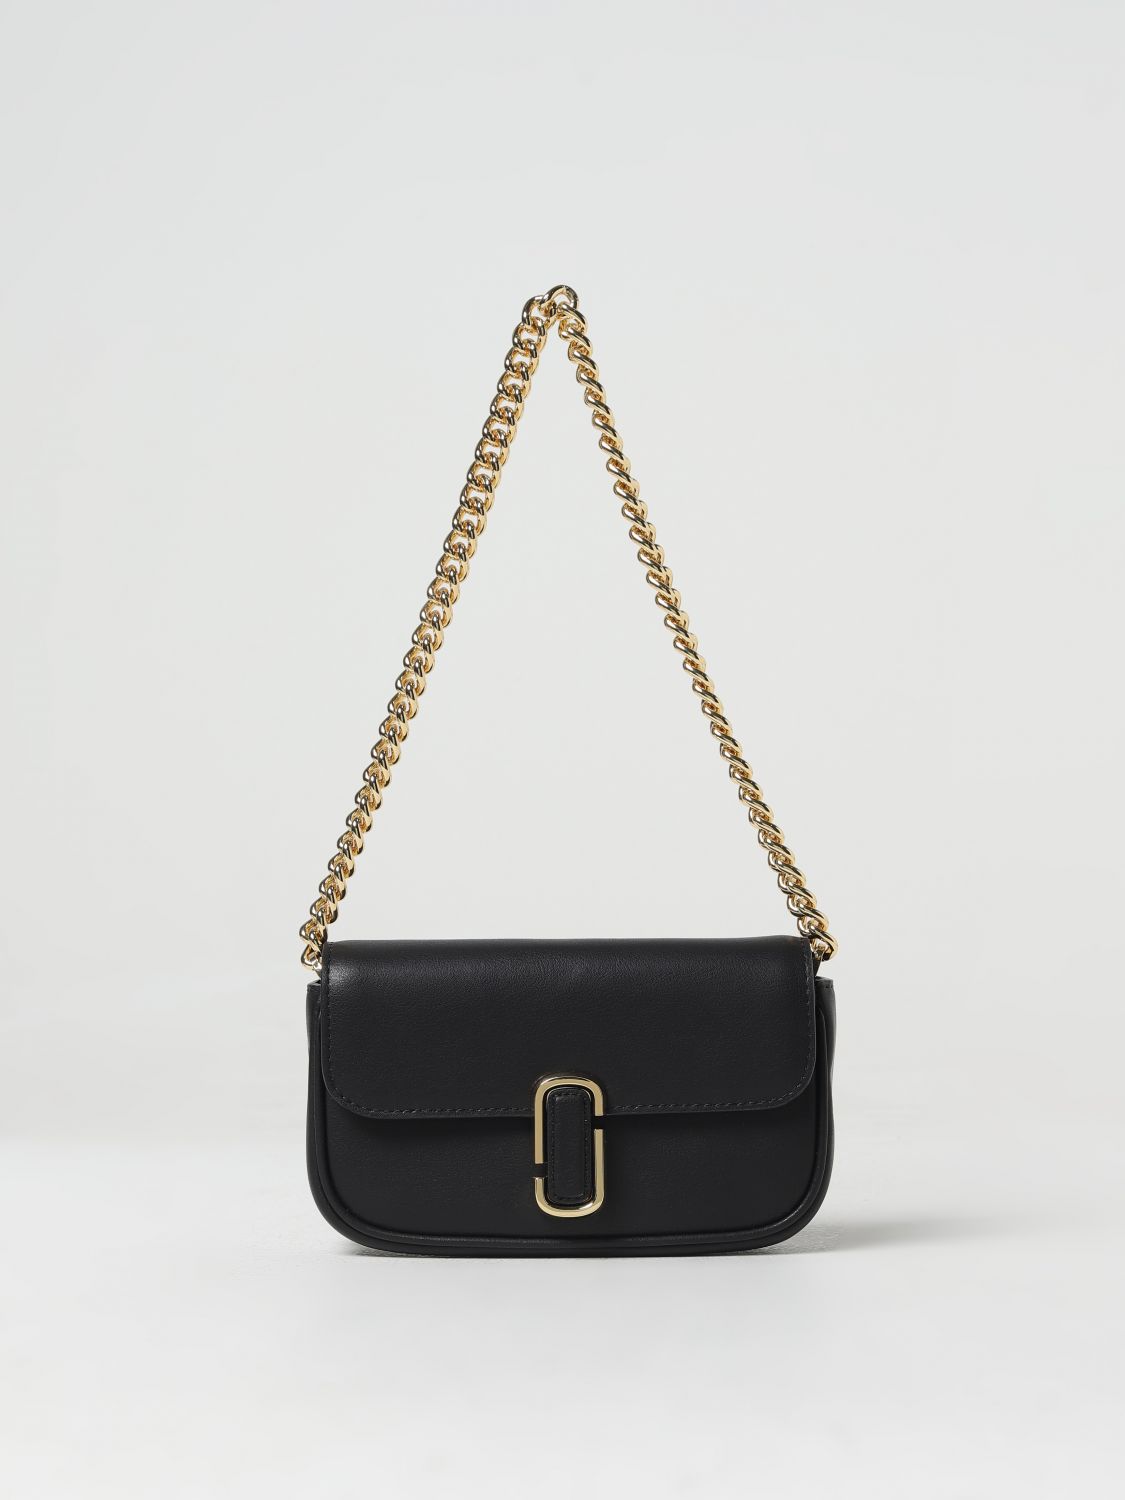 Marc Jacobs The J Bag In Leather In Black 1